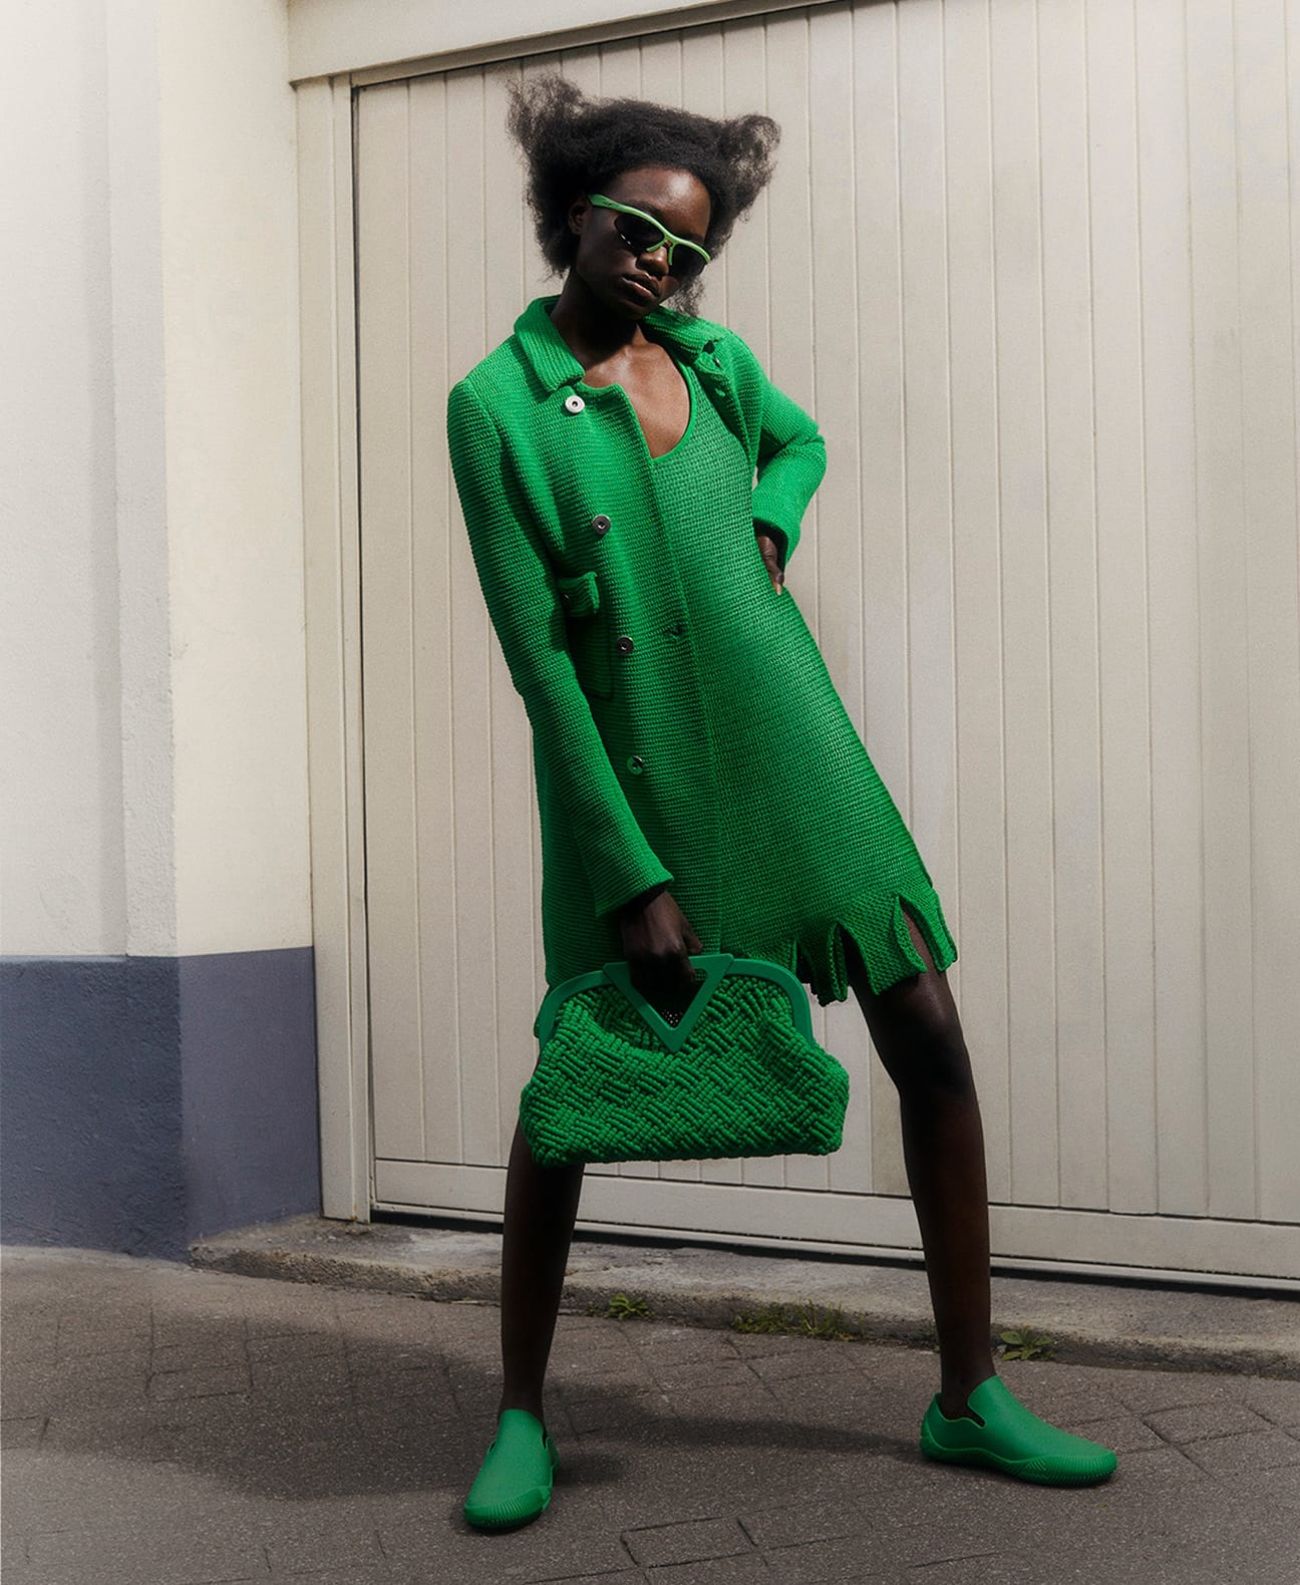 The Power Players: Mary N'Diaye by Antoine Harinthe for Matches Fashion Spring-Summer 2021 Ad Campaign. Clothing: Bottega Veneta Green Double-breasted cotton-blend knitted coat / Bottega Veneta Green Looped-hem scoop-neck cotton-blend mini dress / Bottega Veneta Green Point cotton-macramé clutch bag / Shoes / sunglasses by Bottega Veneta